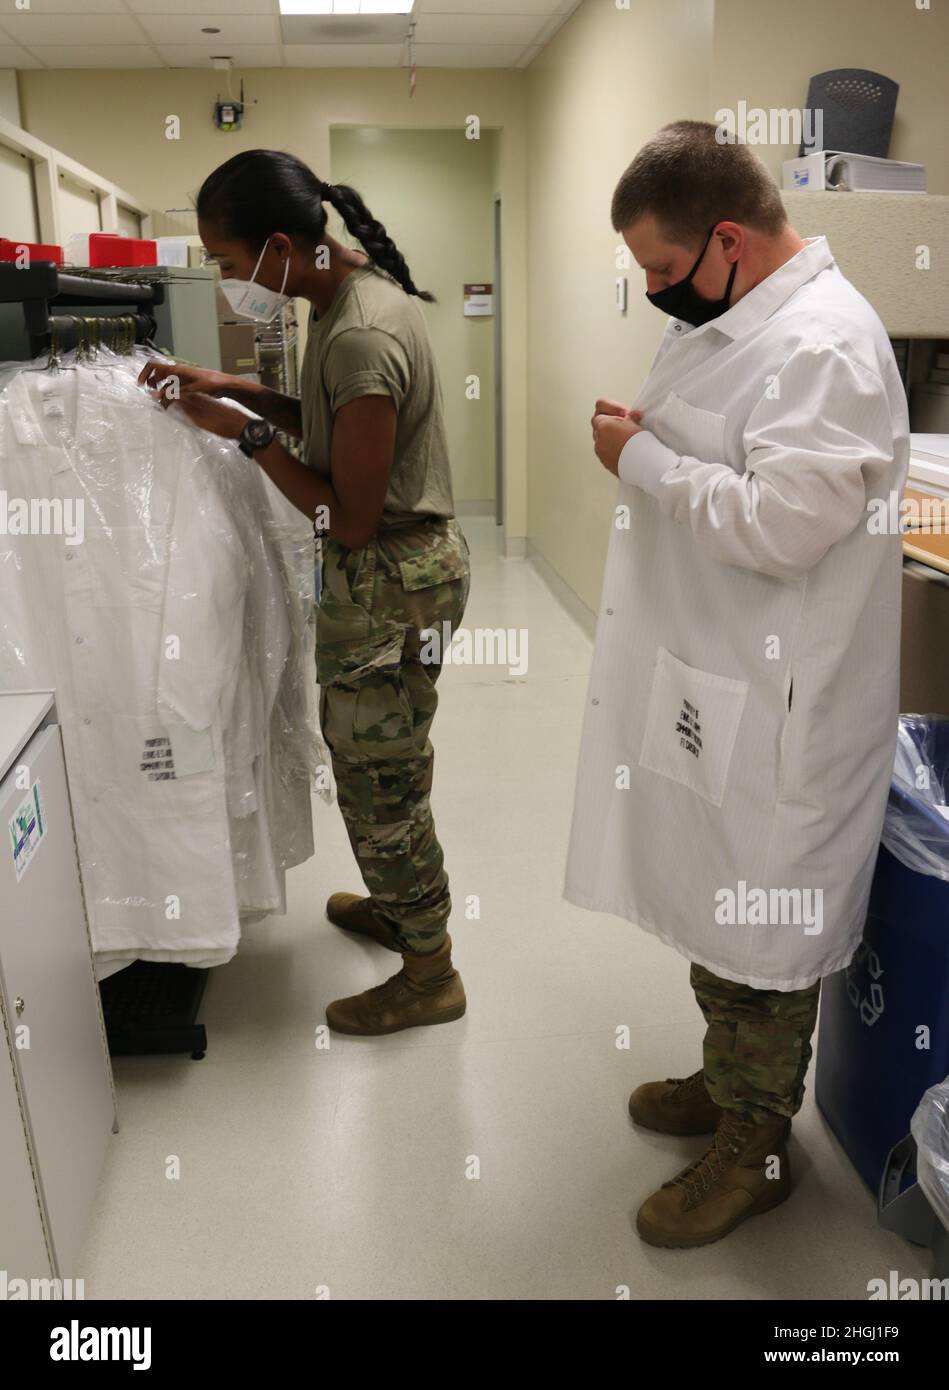 Spc. Kershia Mukoro (left) and Spc. Eric Thompson (right), two medical laboratory specialists from the 7450th Medical Operations Readiness Unit (MORU), start their shift at the Evans Army Community Hospital Laboratory for their U.S. Army Reserve Annual Training Mobilization Exercise Aug. 10, 2021. Stock Photo